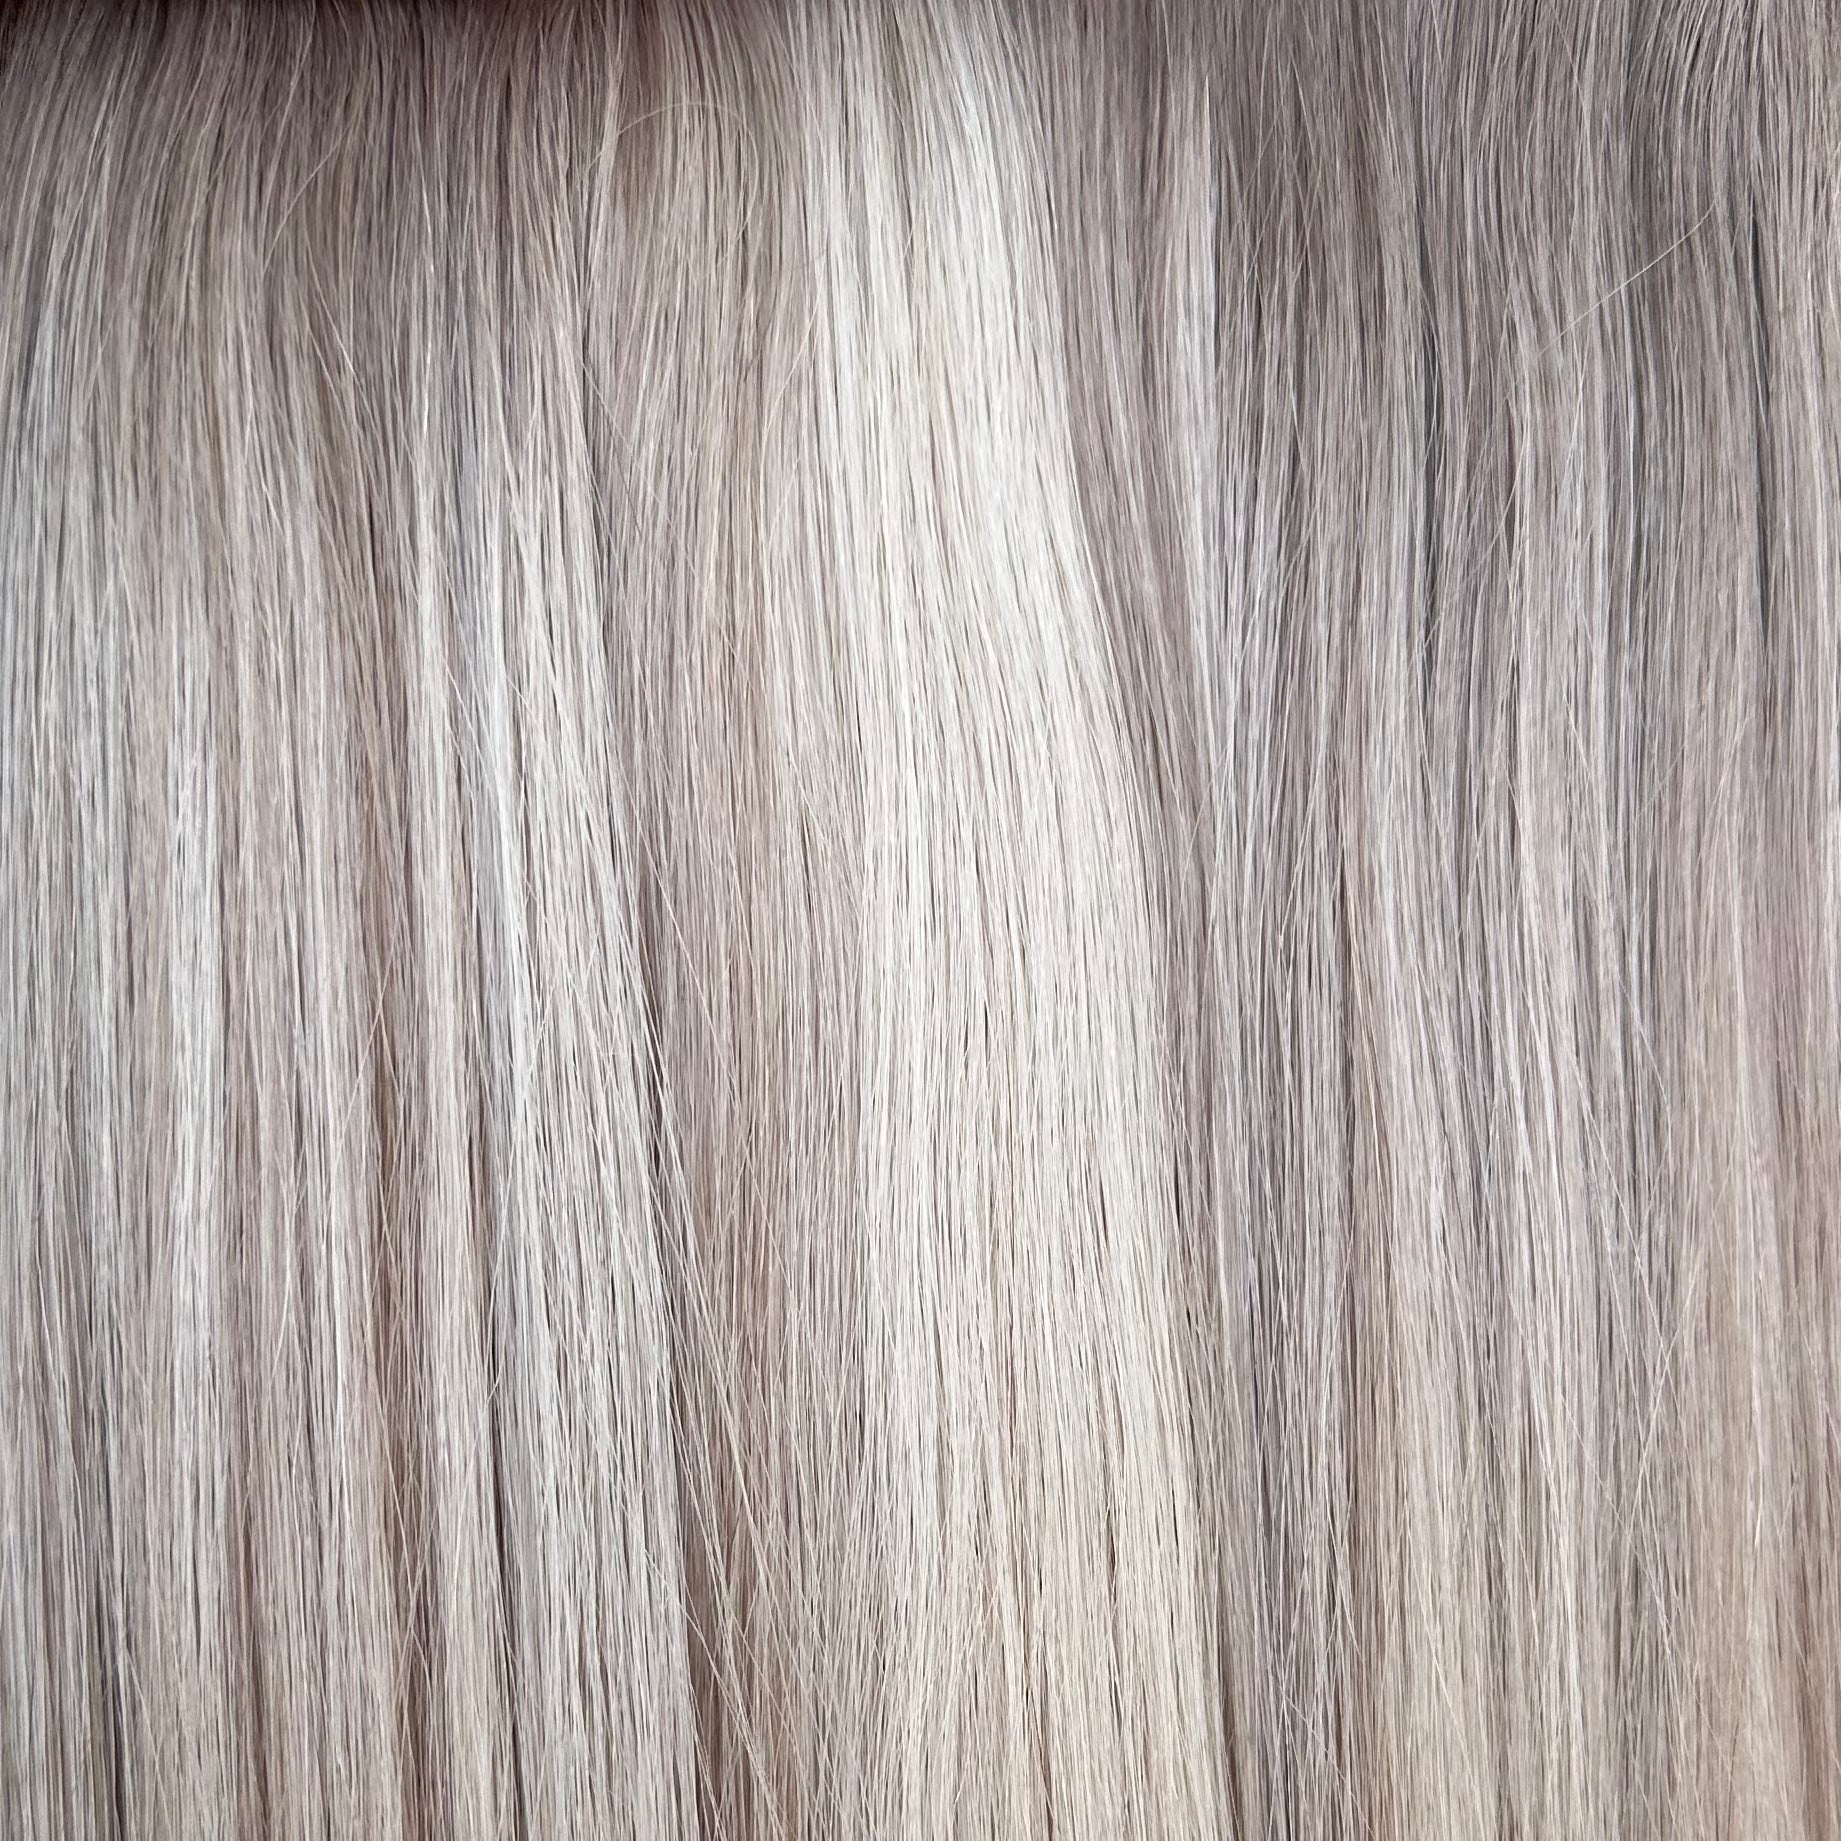 Rooted Iridescent Blonde Piano - Luxe Hand Tied Wefts